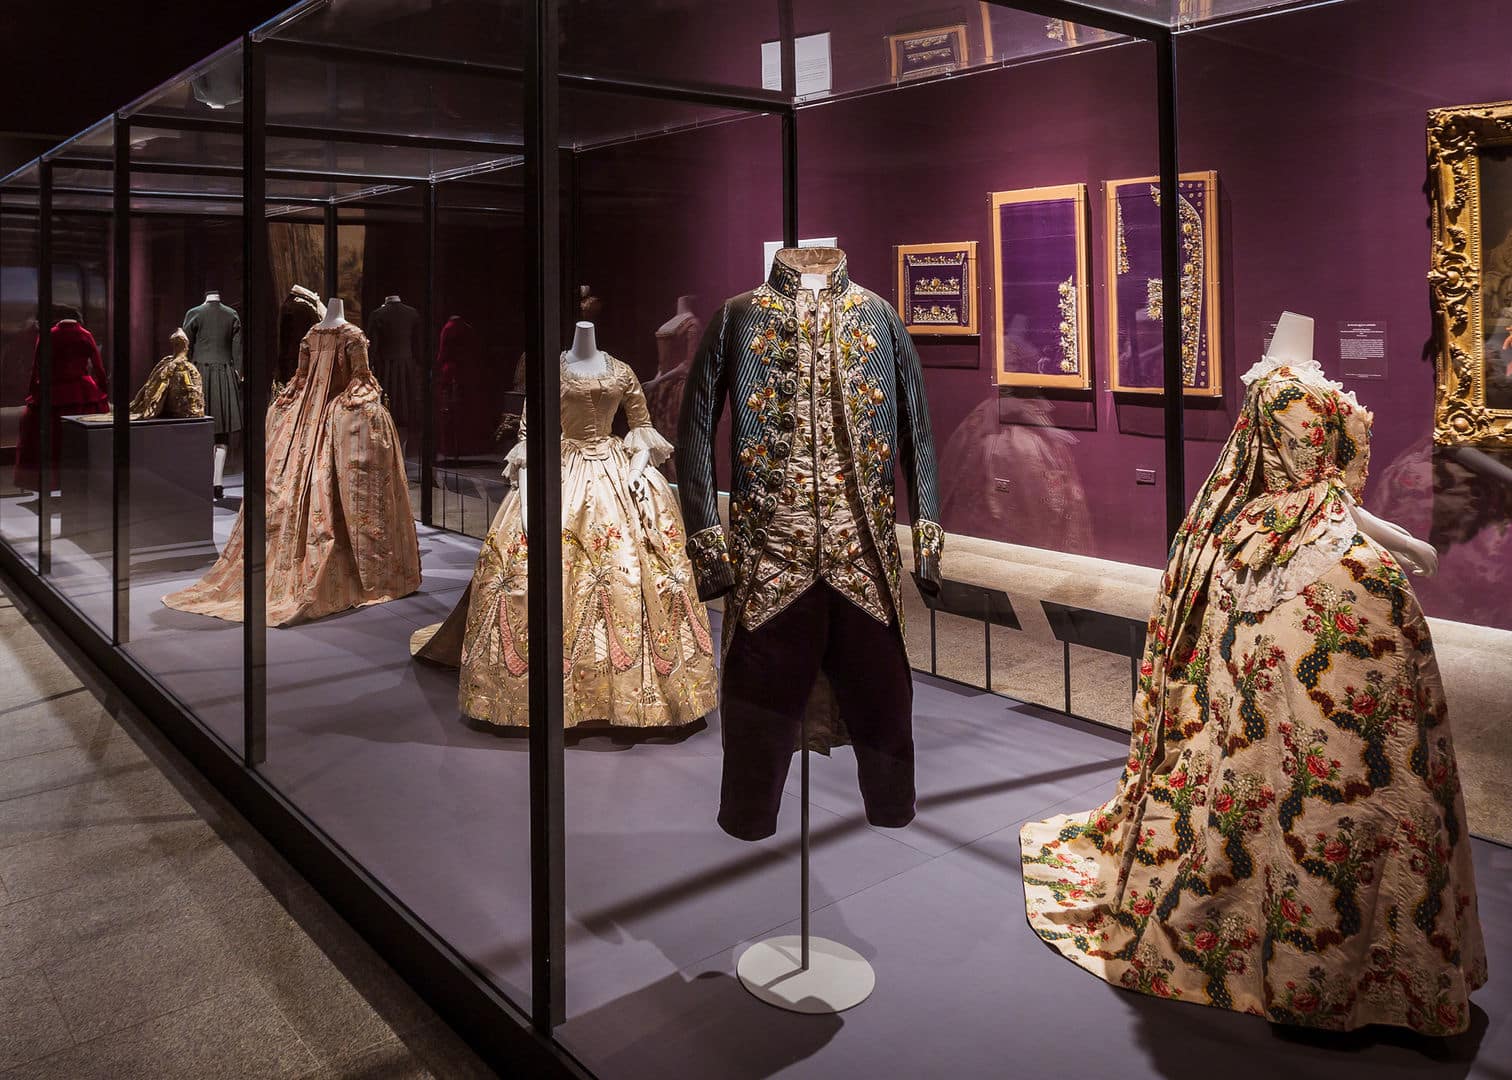 Timeline for women's fashion from 1665 until present day